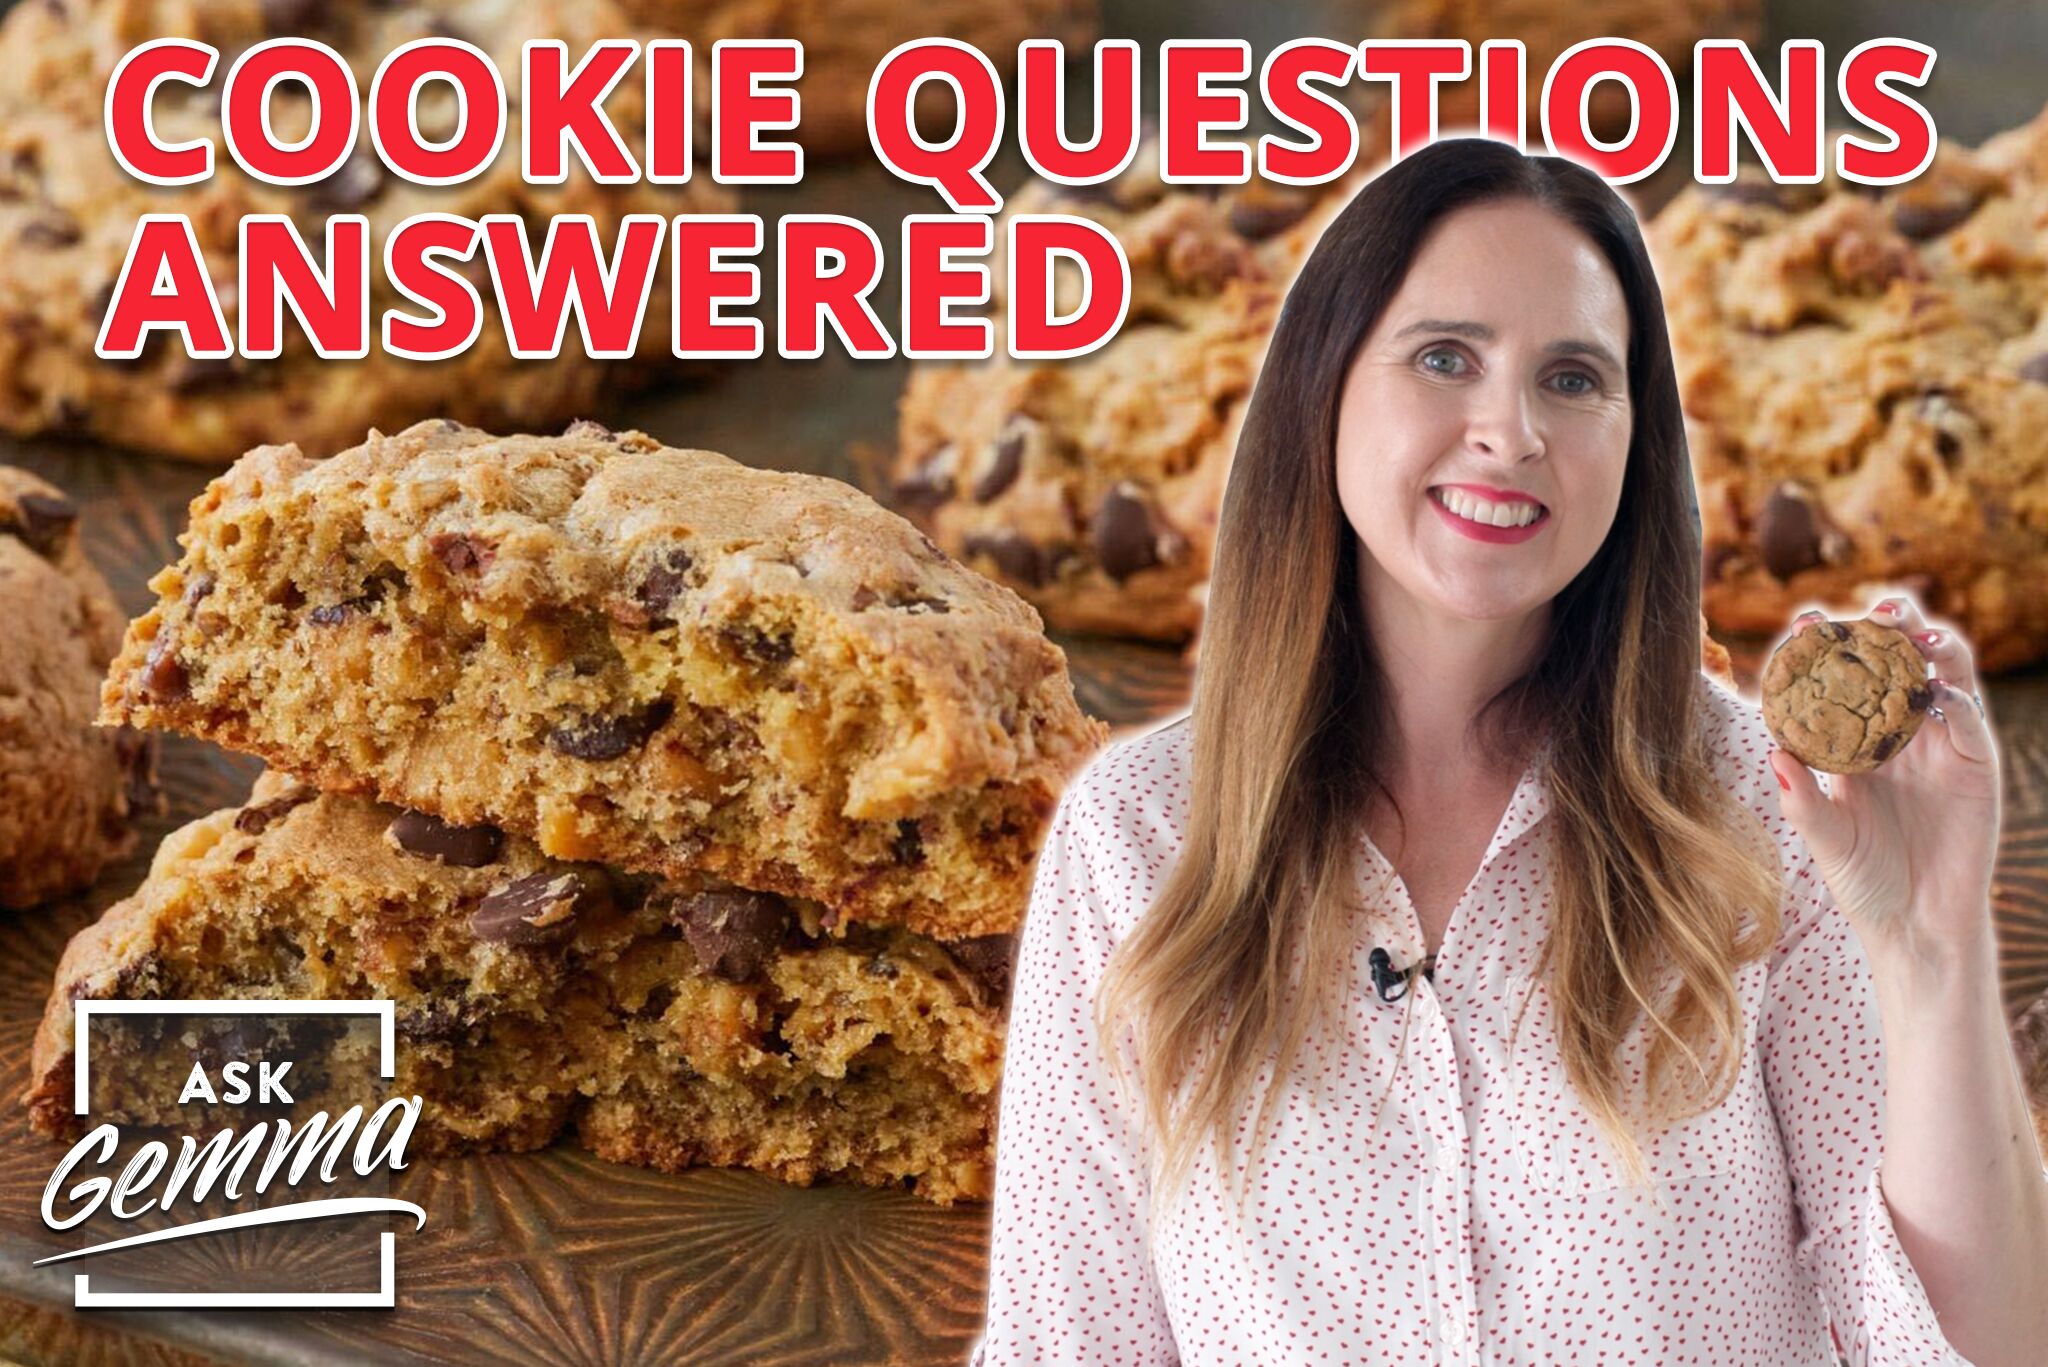 Underneath the "COOKIE QUESTIONS ANSWERED", are giant, flavor-packed chocolate chip and walnut Levain cookies in the background. Professional chef and Baer Gemma is holding a chocolate chip cookie with pools of chocolate and beautifully crinkled top.